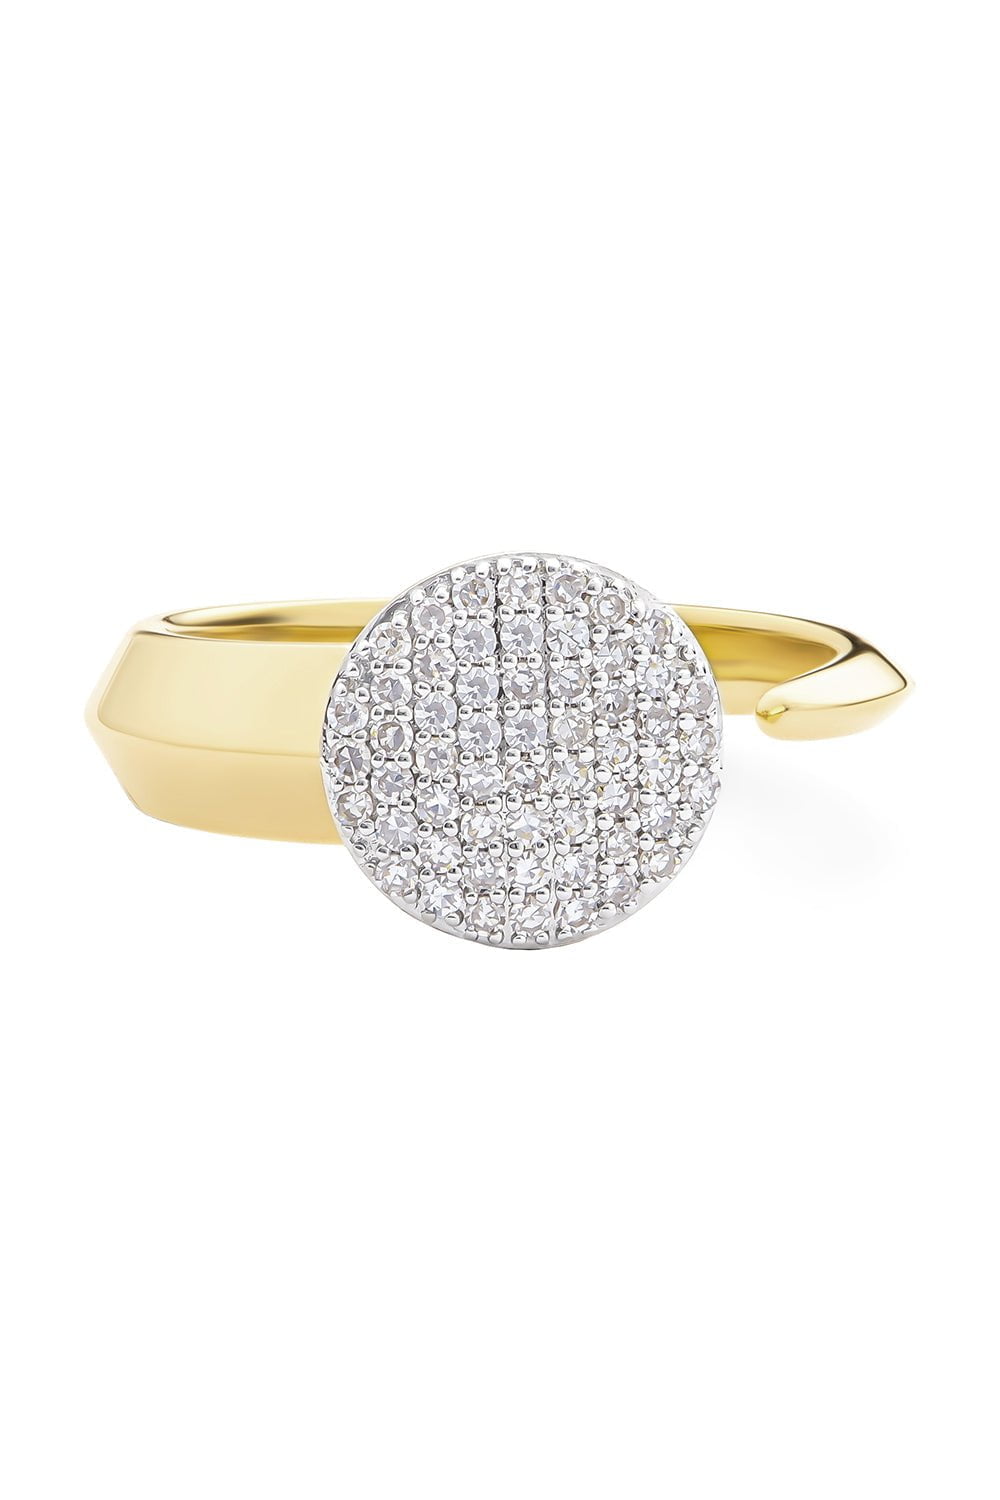 PHILLIPS HOUSE-Infinity Wrap Ring-YELLOW GOLD